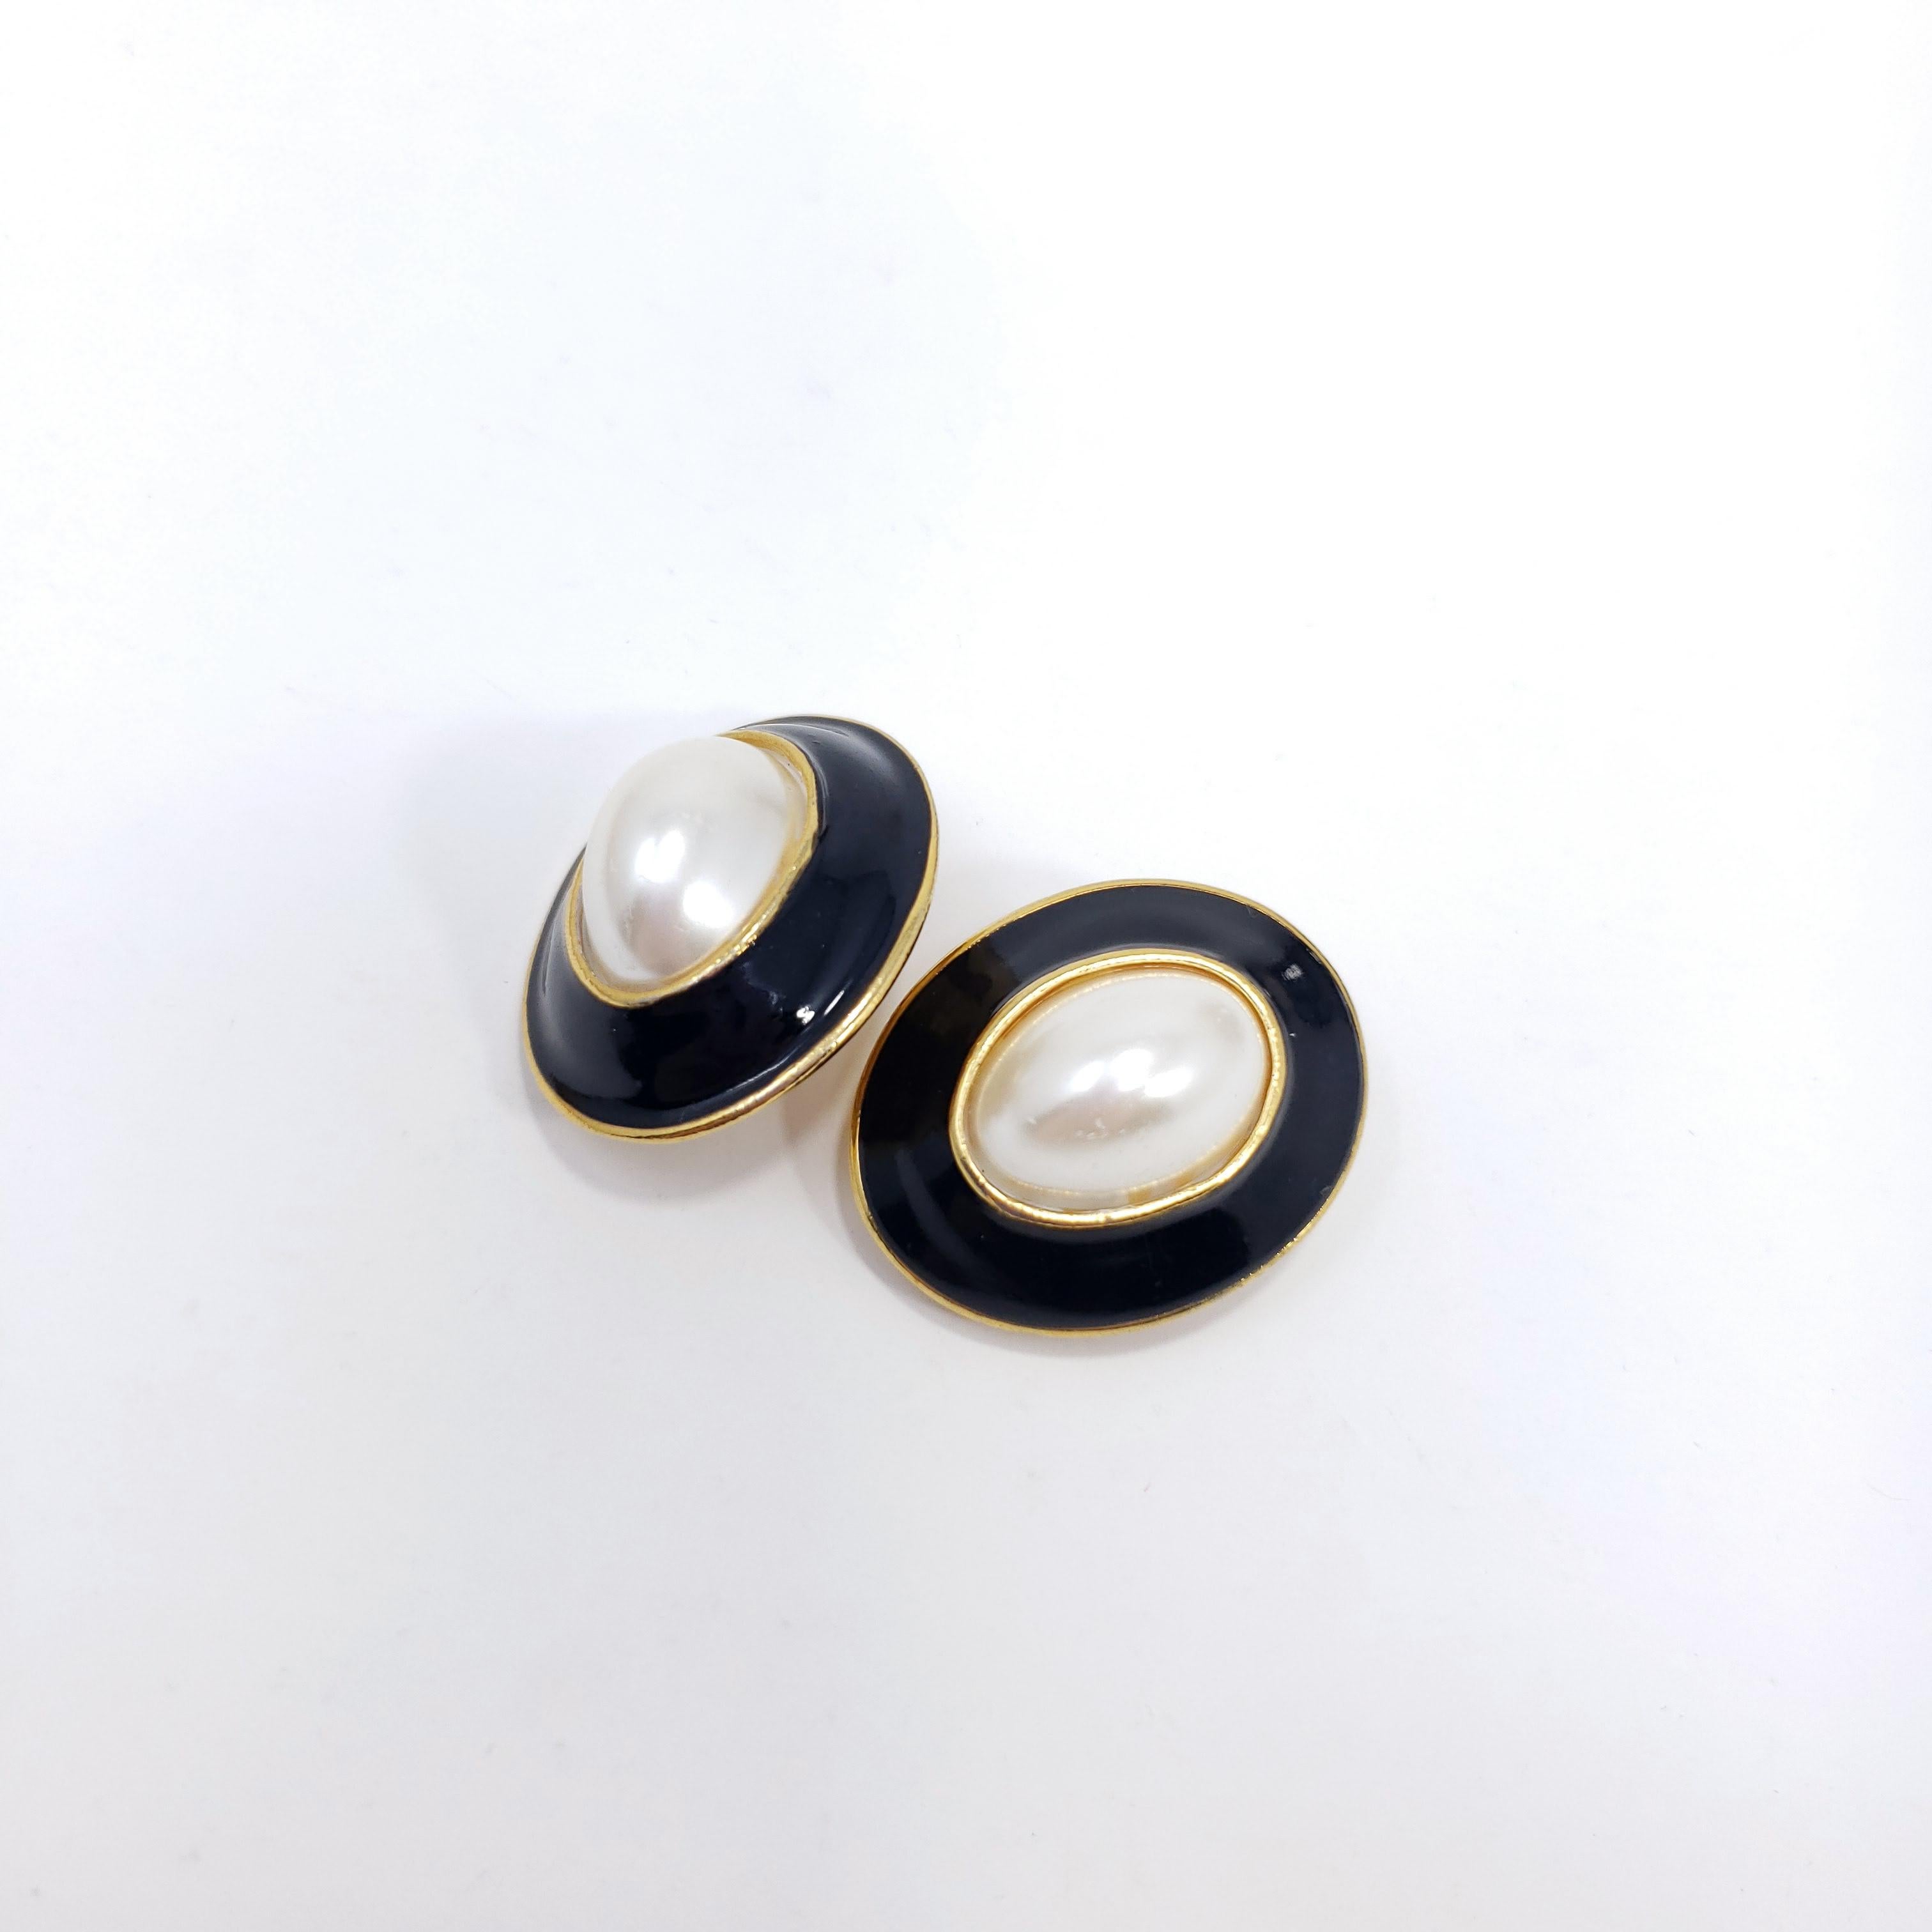 Big and bold, a pair of chunky clip on earrings. Stylish retro flair!

Black enamel and faux pearl center cabochon. Gold plated.

Late 1900s.